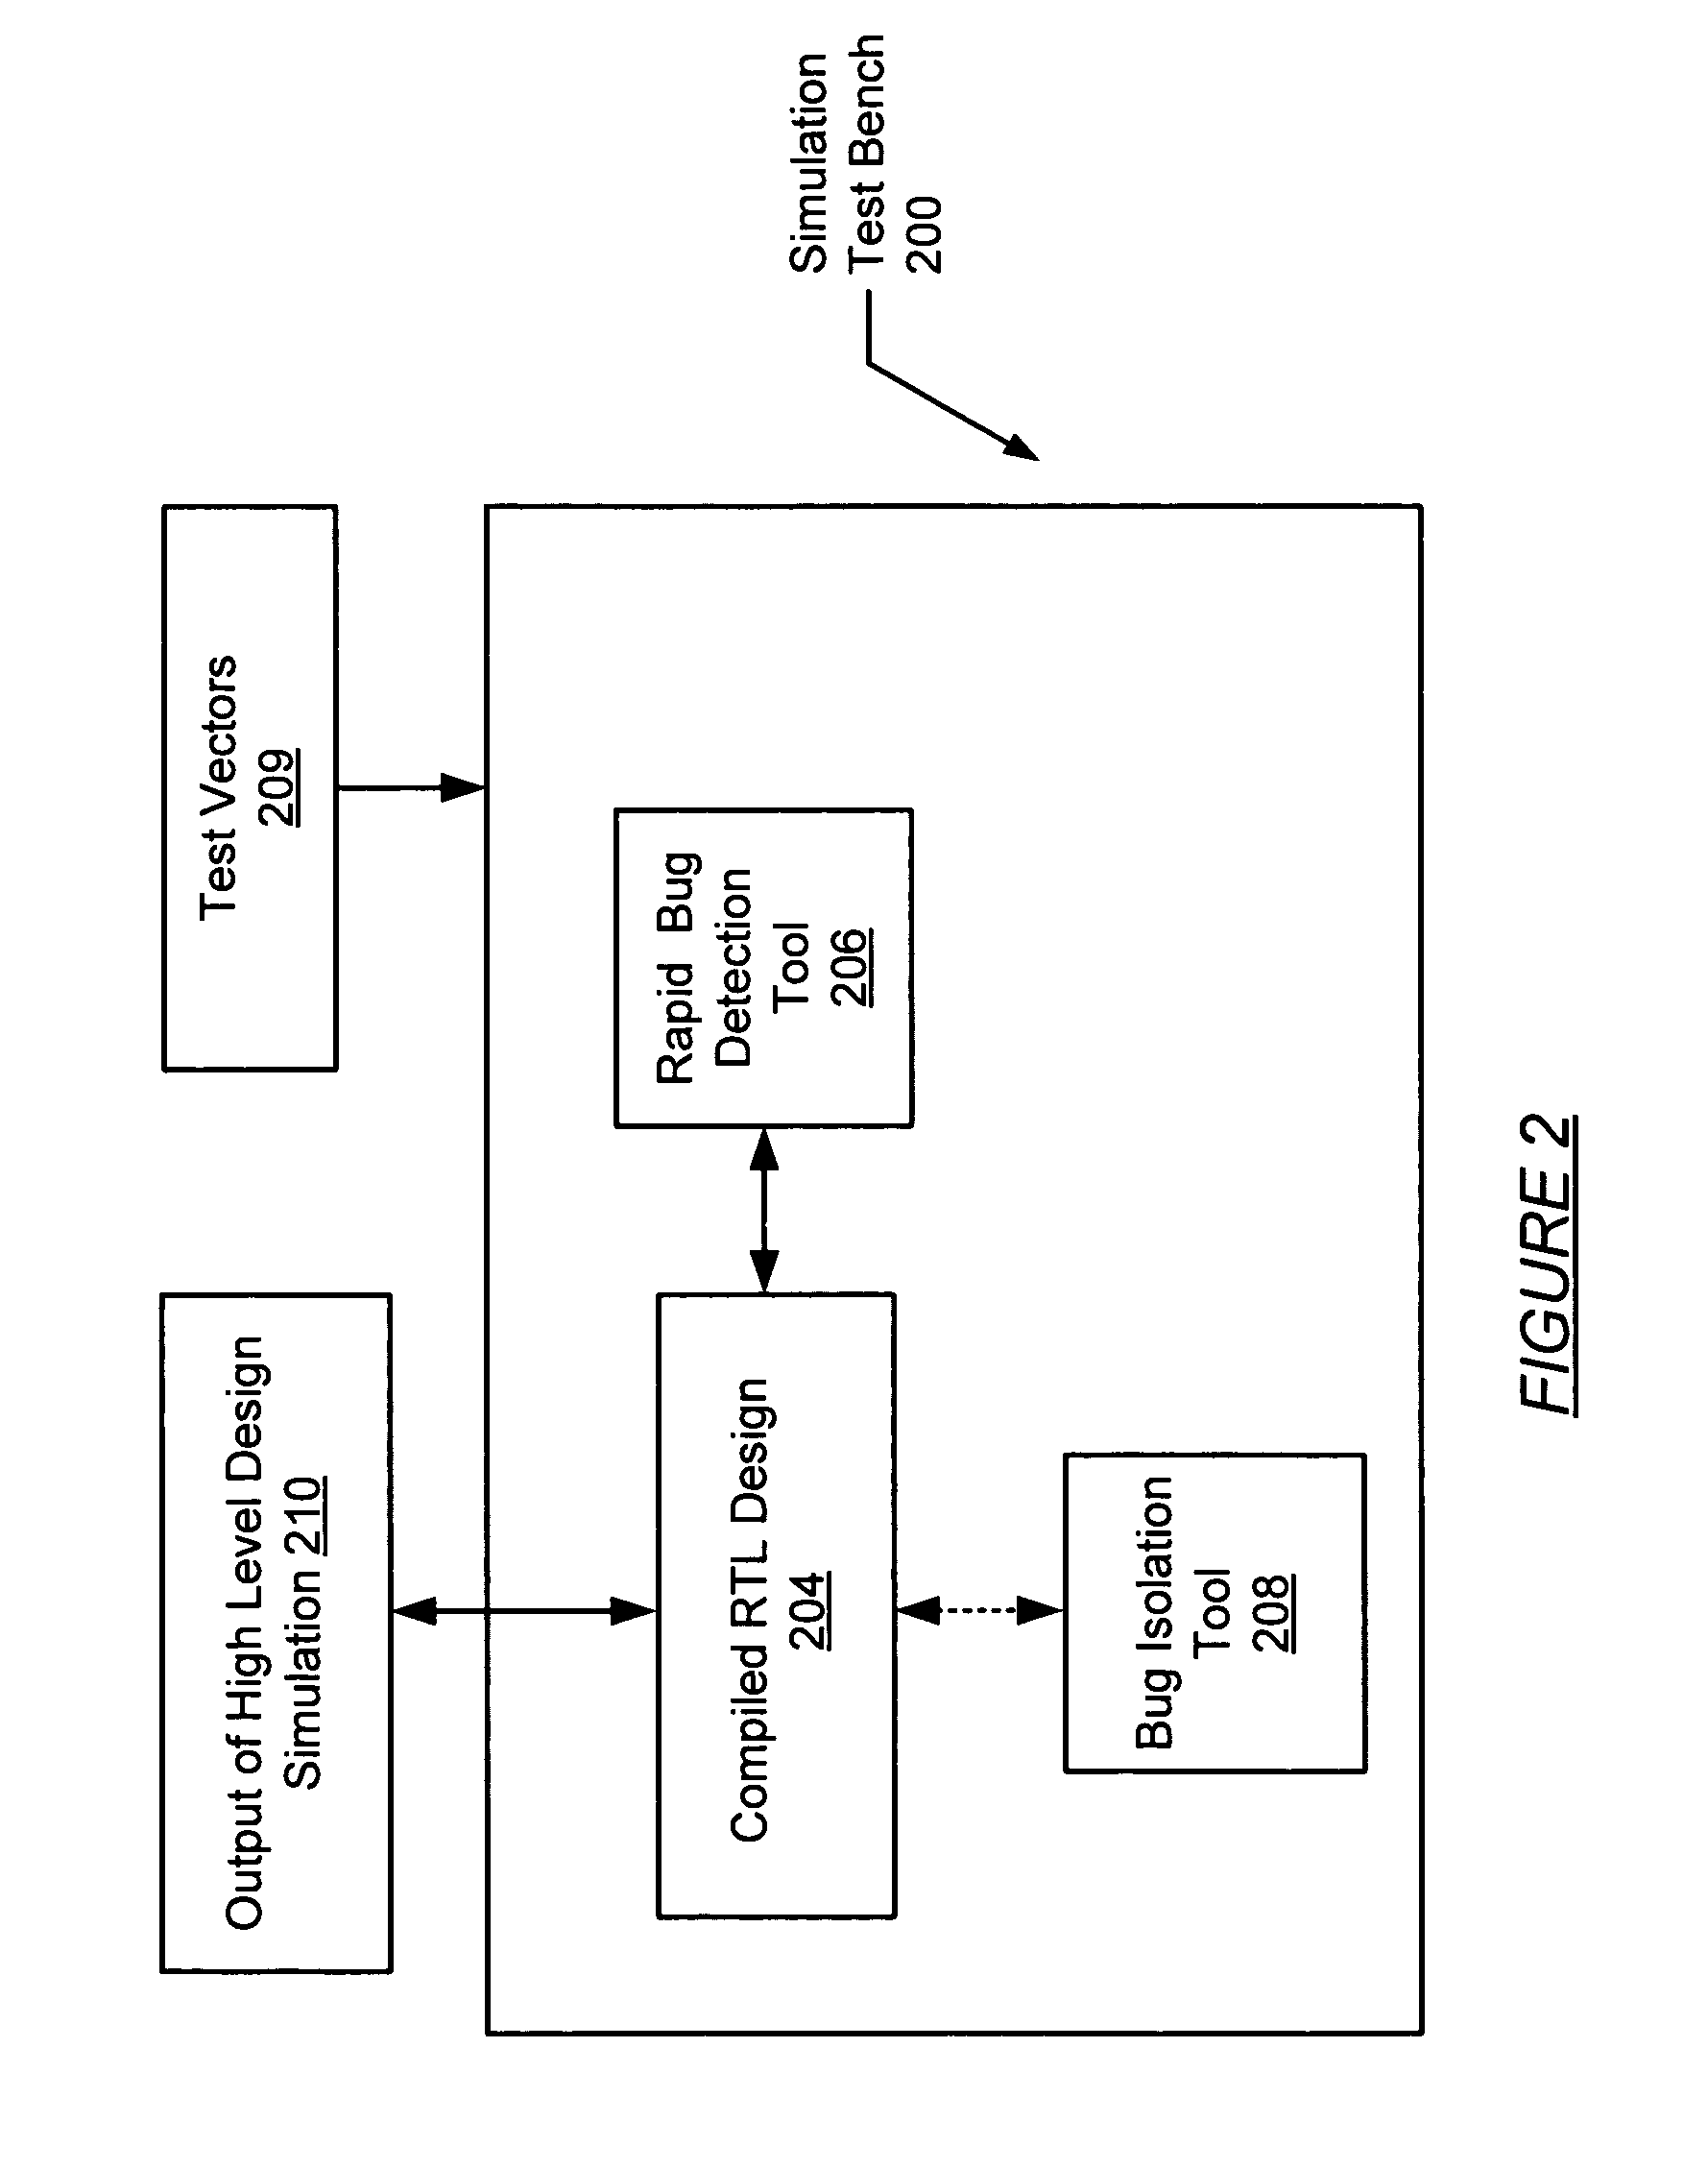 Method and apparatus for detection and isolation during large scale circuit verification